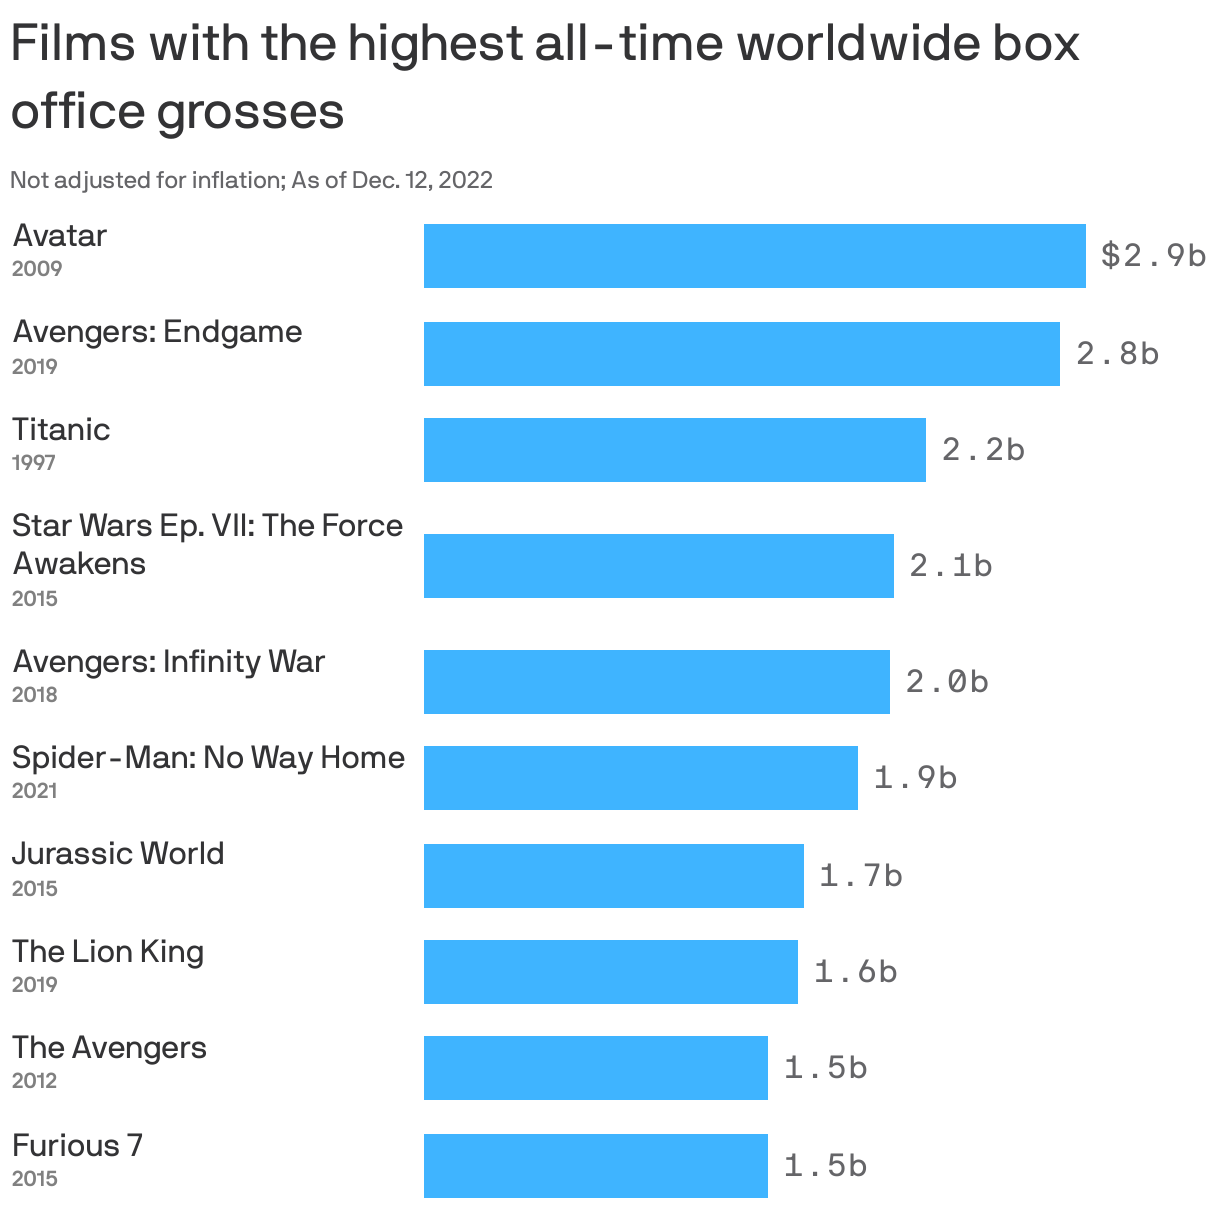 Films with the highest all-time worldwide box office grosses